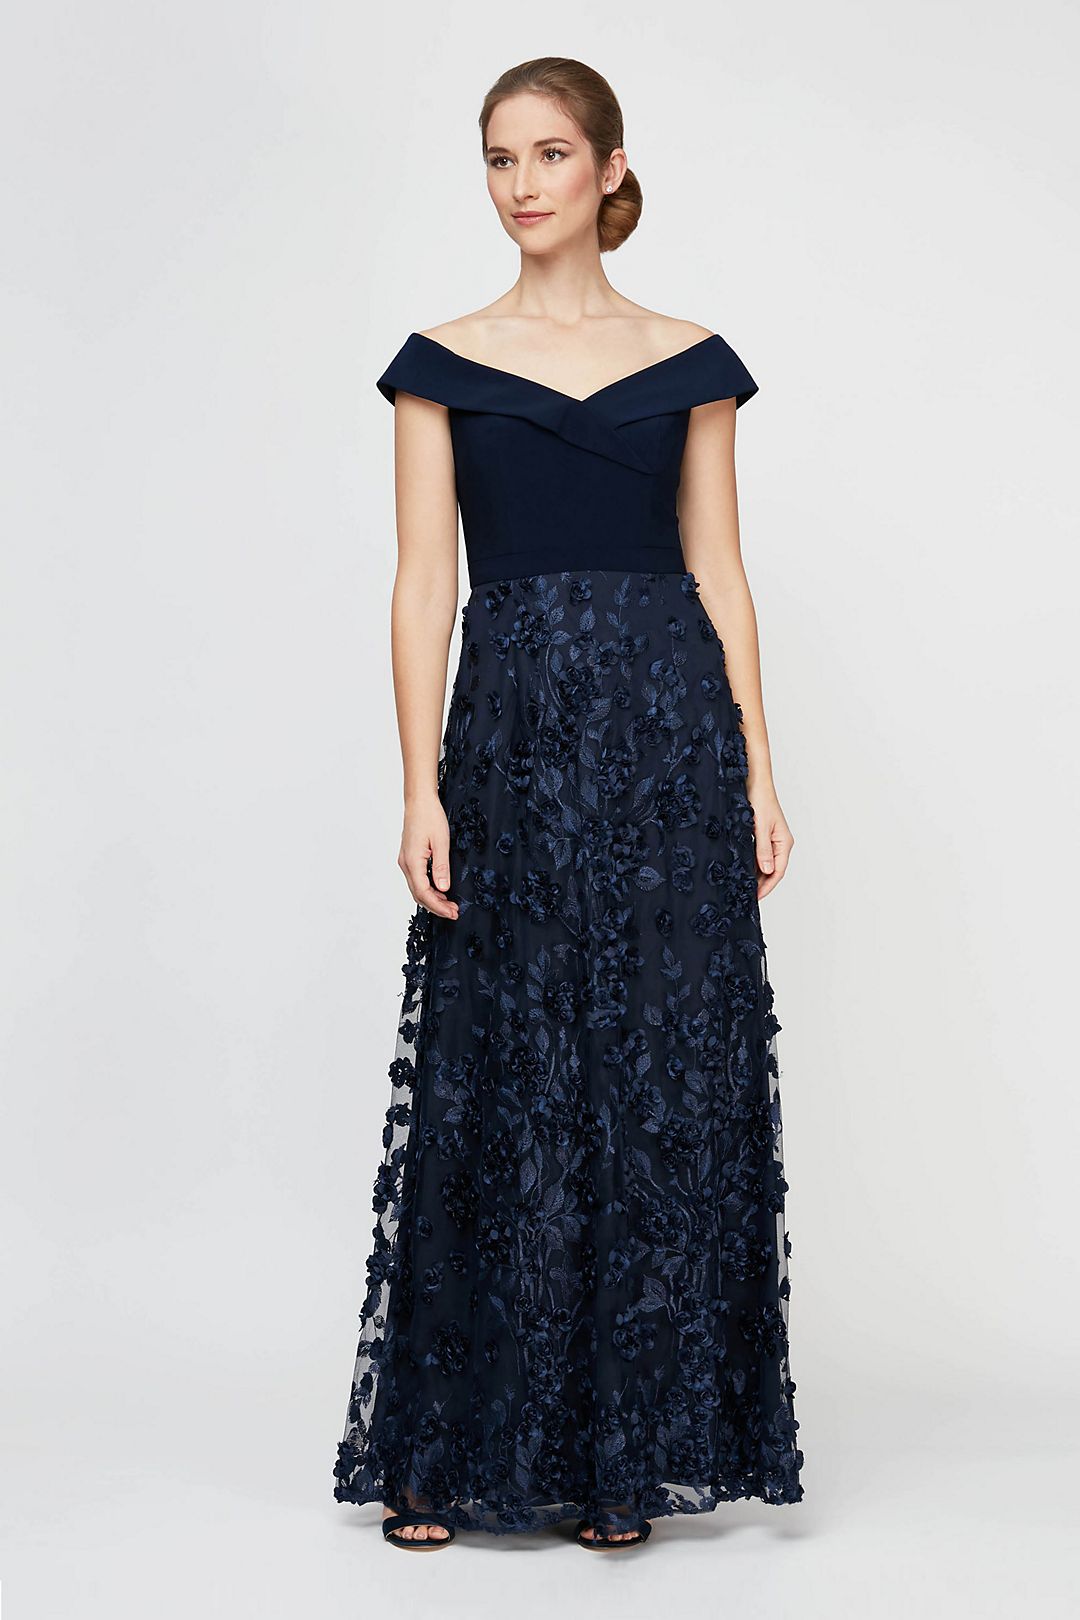 Off the Shoulder Gown with Floral Applique Overlay Image 1